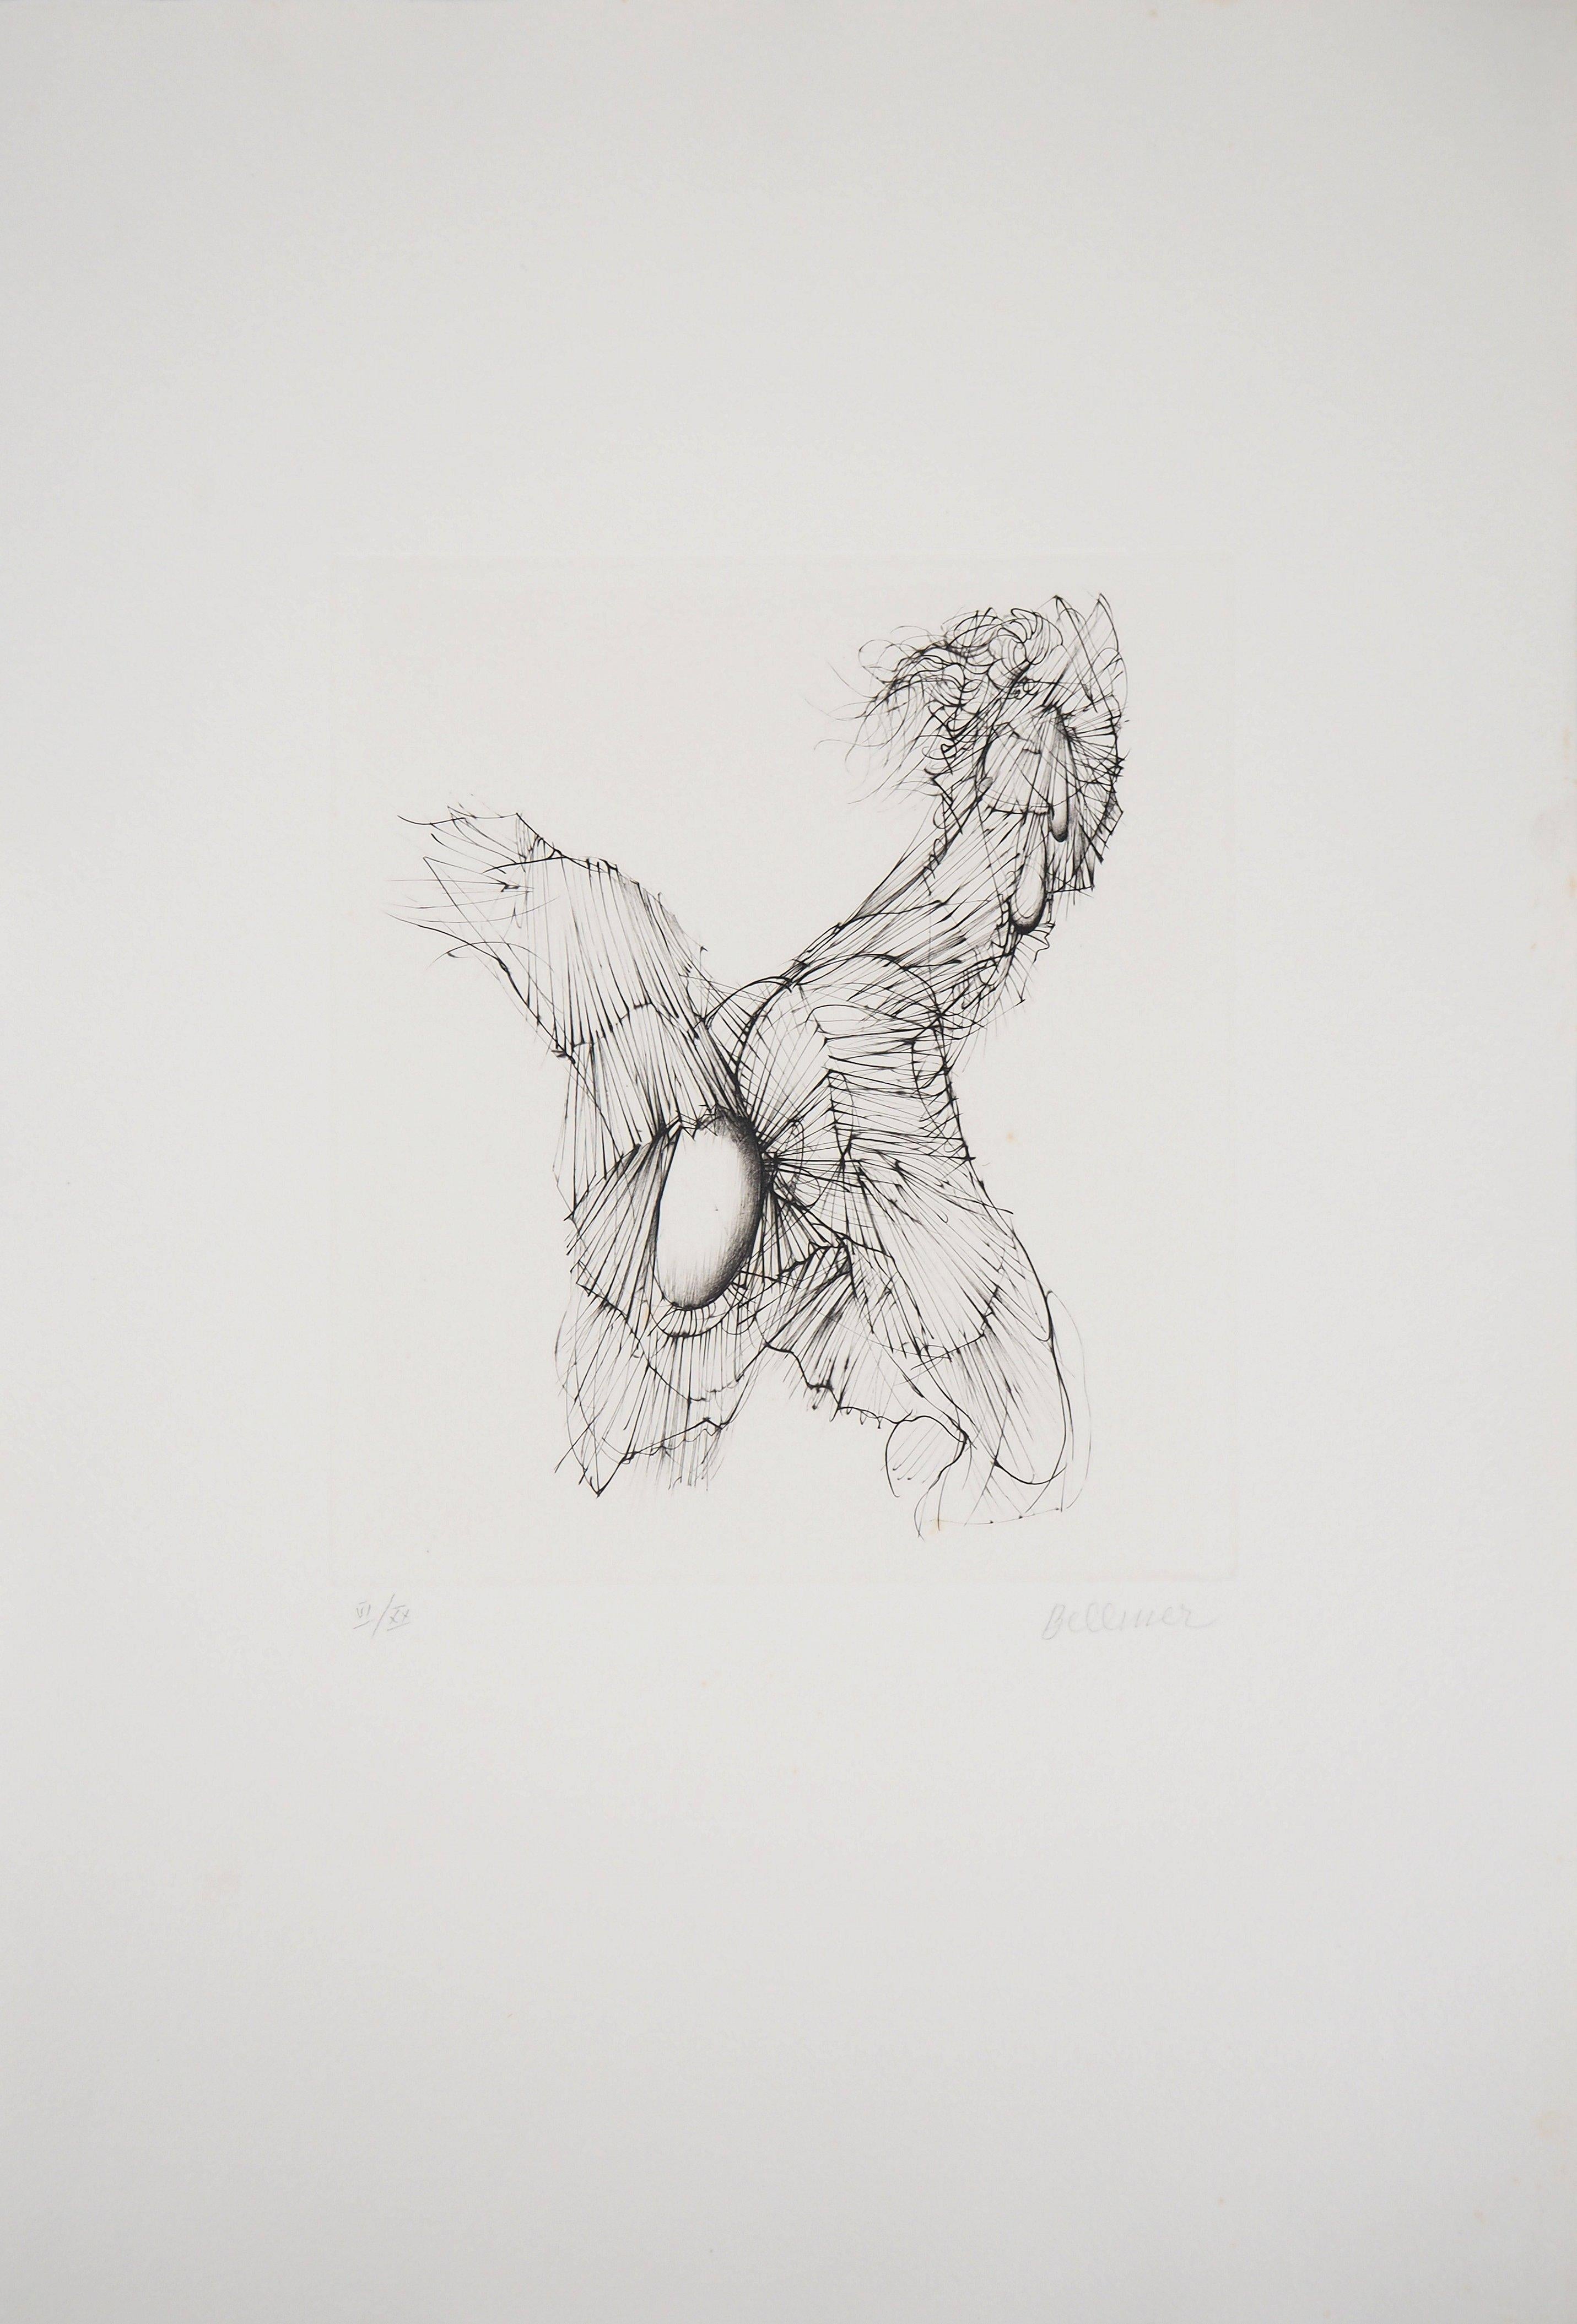 Hans Bellmer Abstract Print - Abstract Erotism - Original Etching Handsigned and Numbered